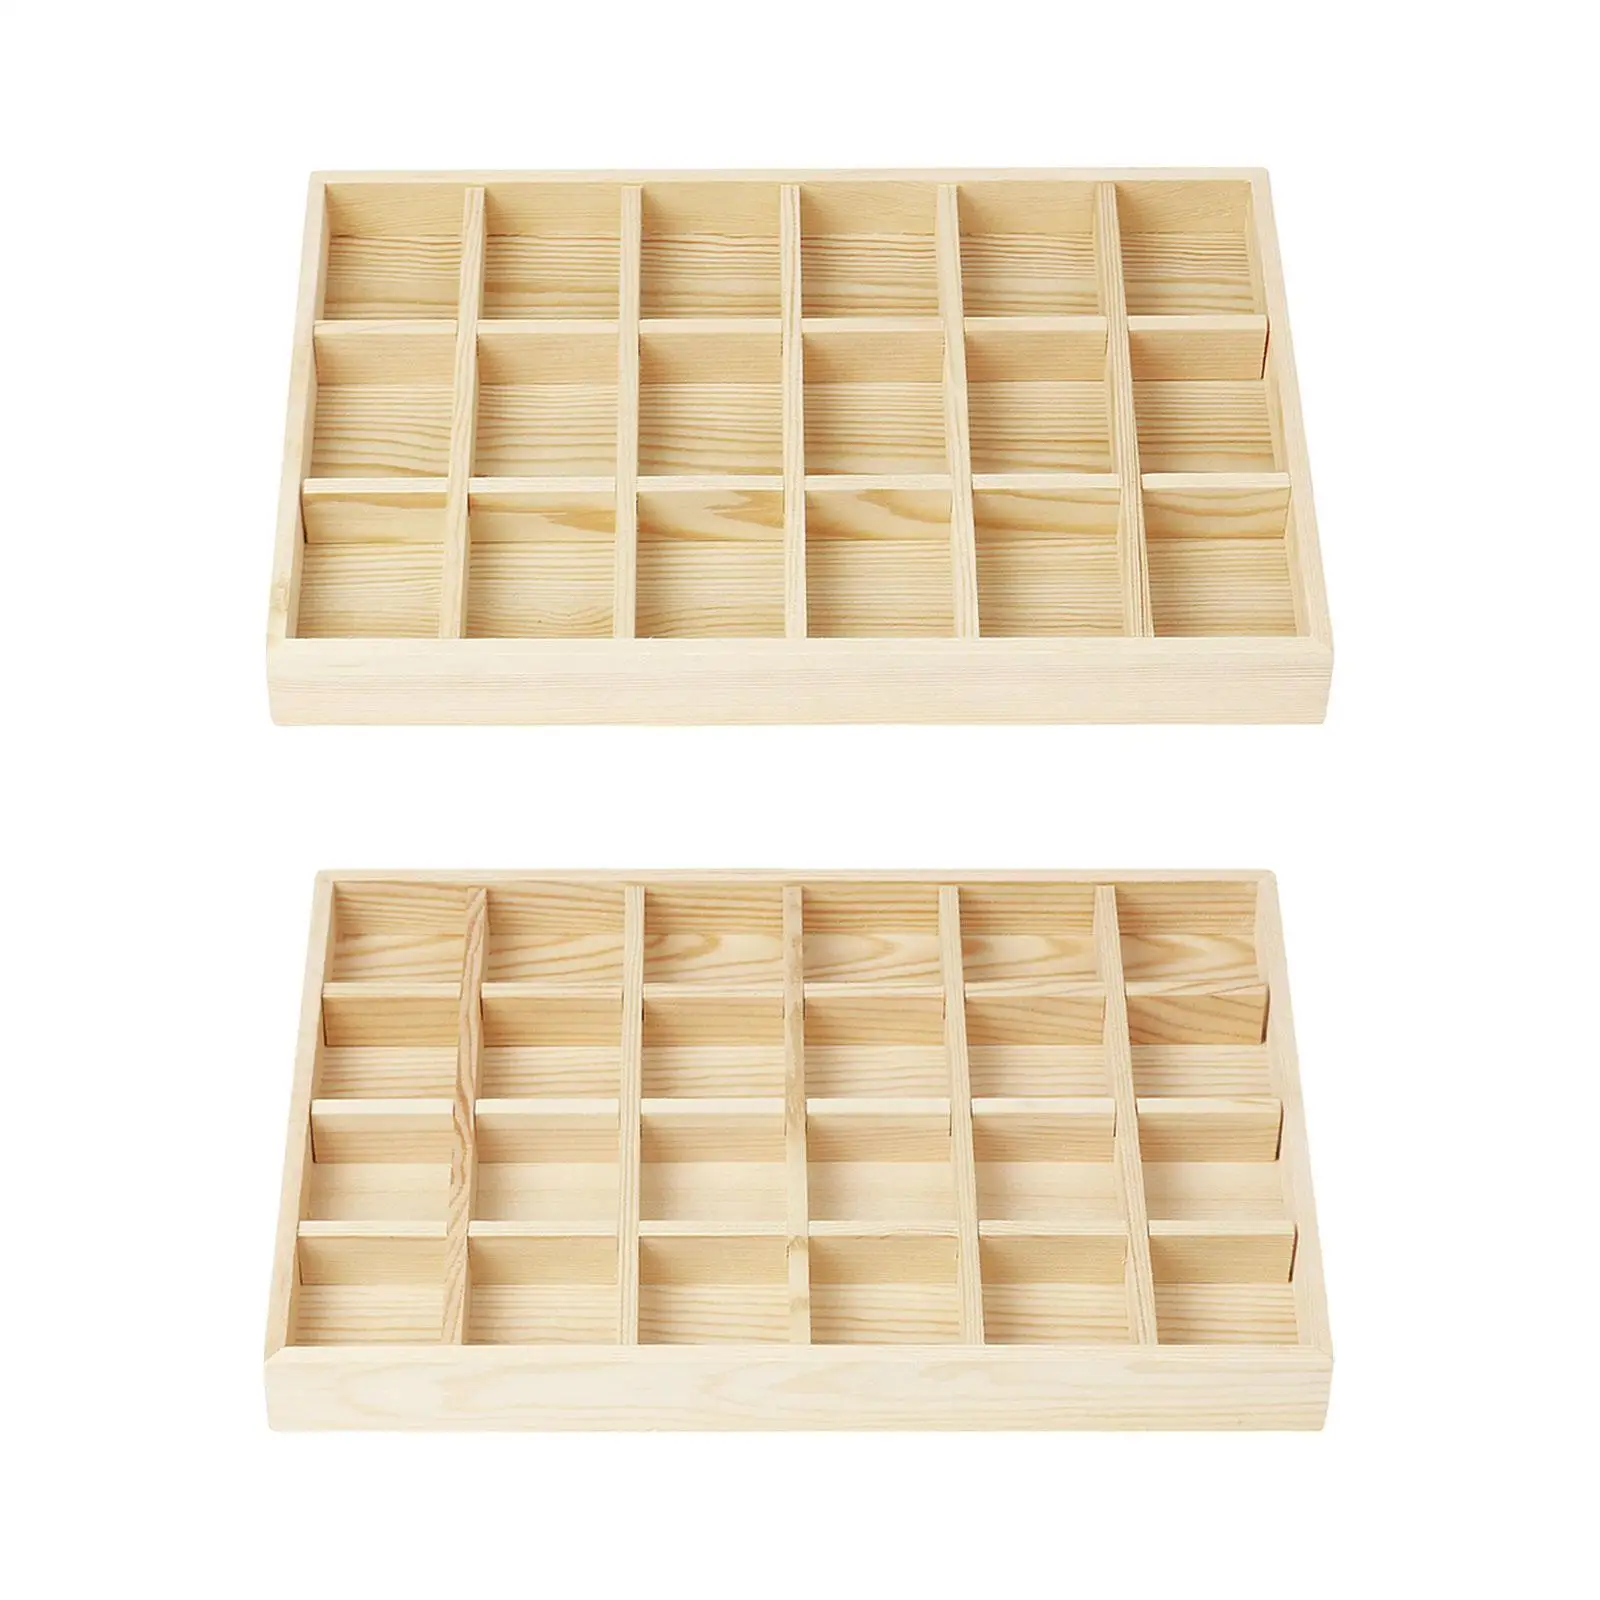 

Jewelry Tray Wood Decorations for Women Girls Jewellery Storage Tray for Selling Showcase Countertop Dresser Dorm Apartment